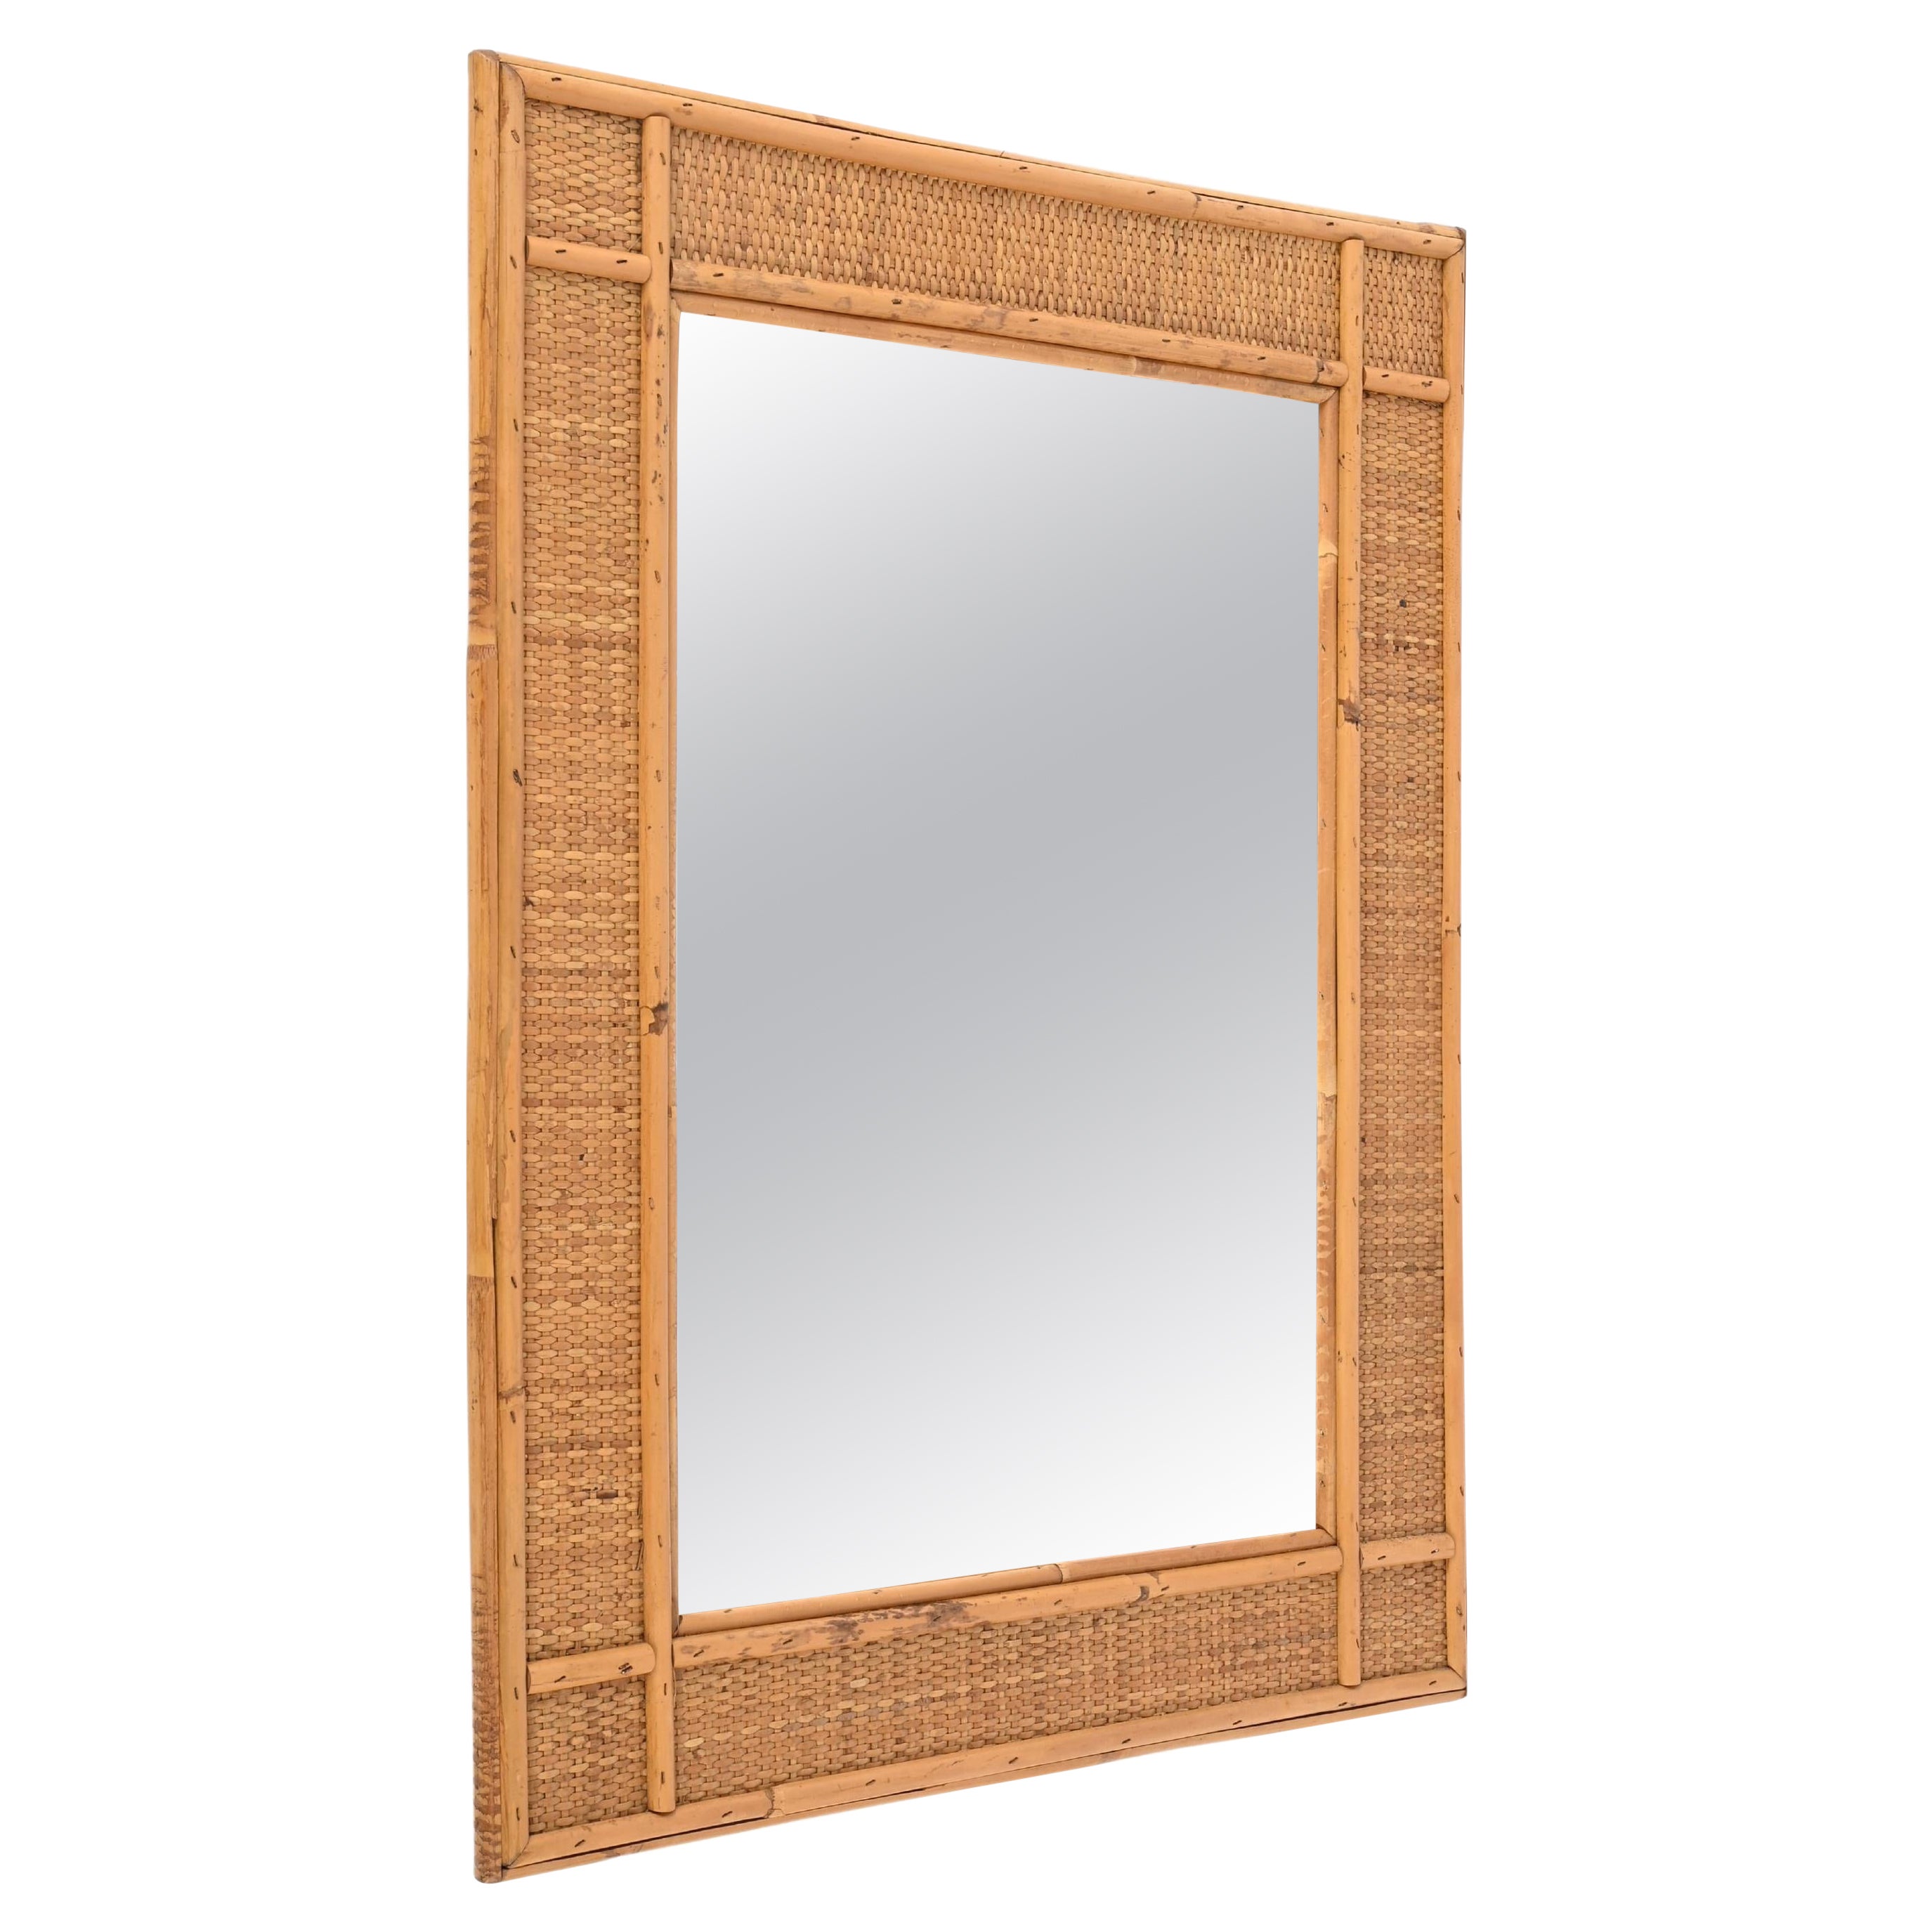 Midcentury Rectangular  Bamboo and Woven Rattan Wicker Mirror, Italy 1970s For Sale